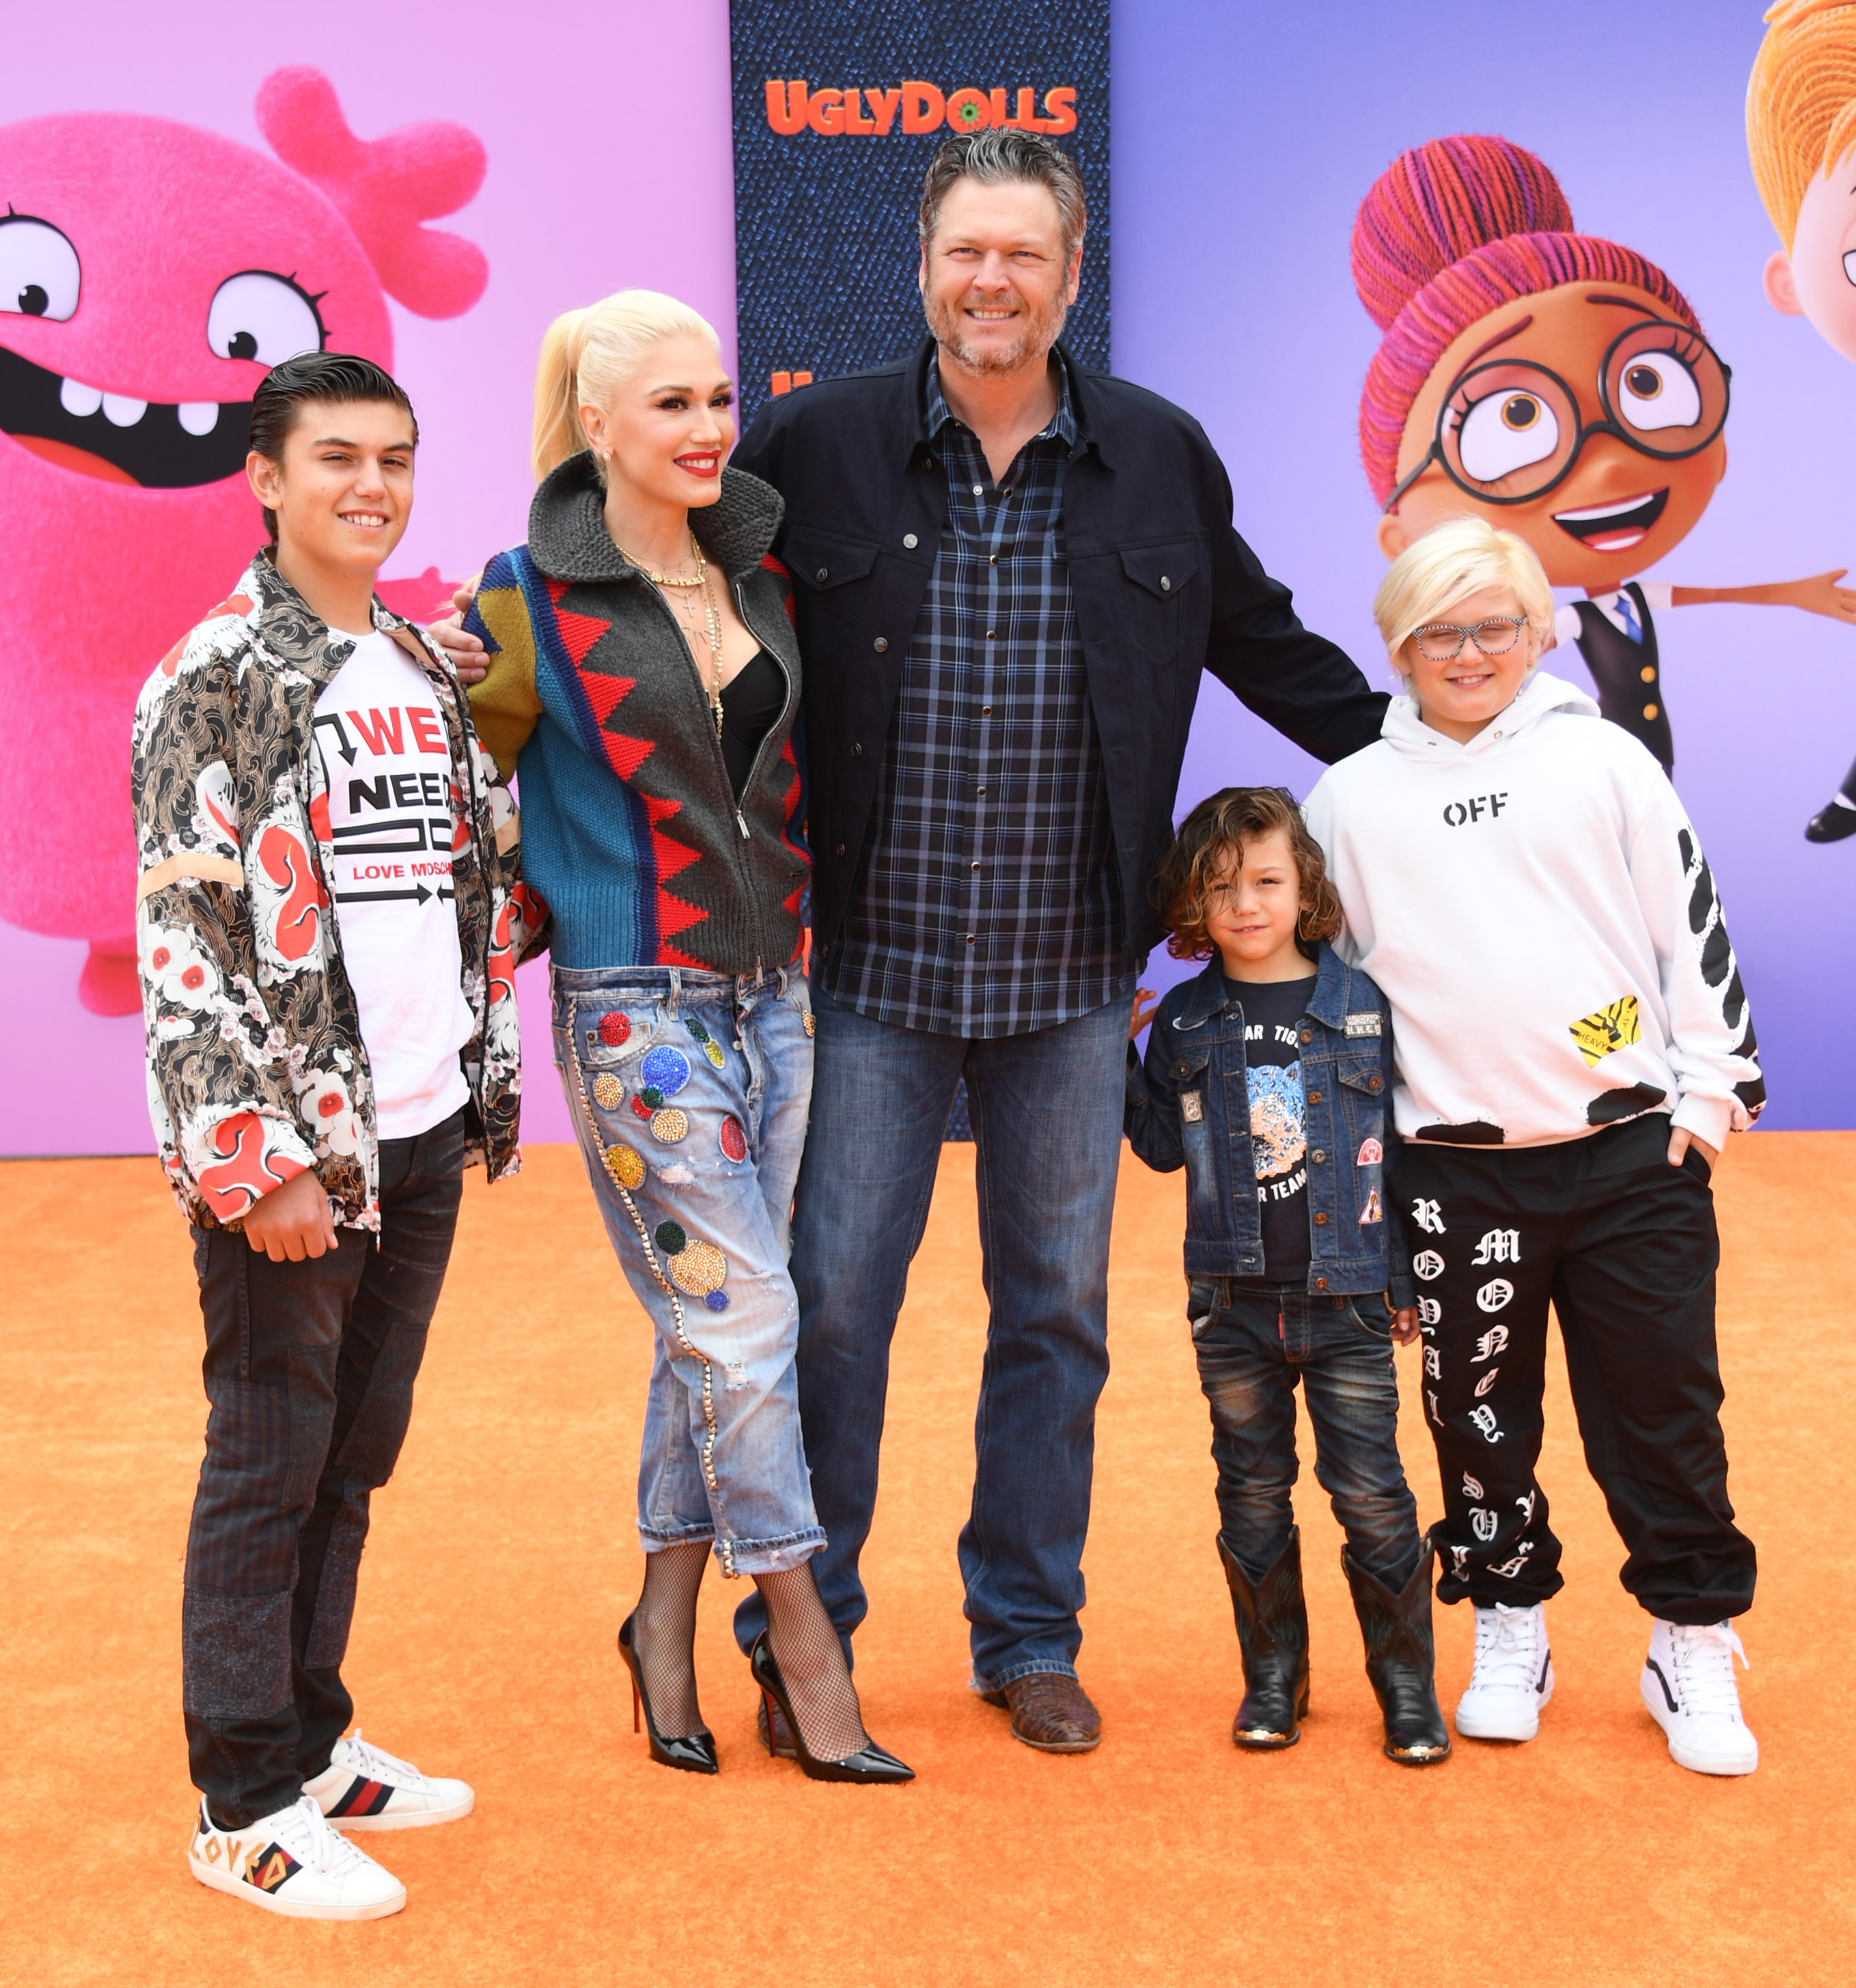 Blake has grown close with Gwen Stefani's three children she shares with ex Gavin Rossdale